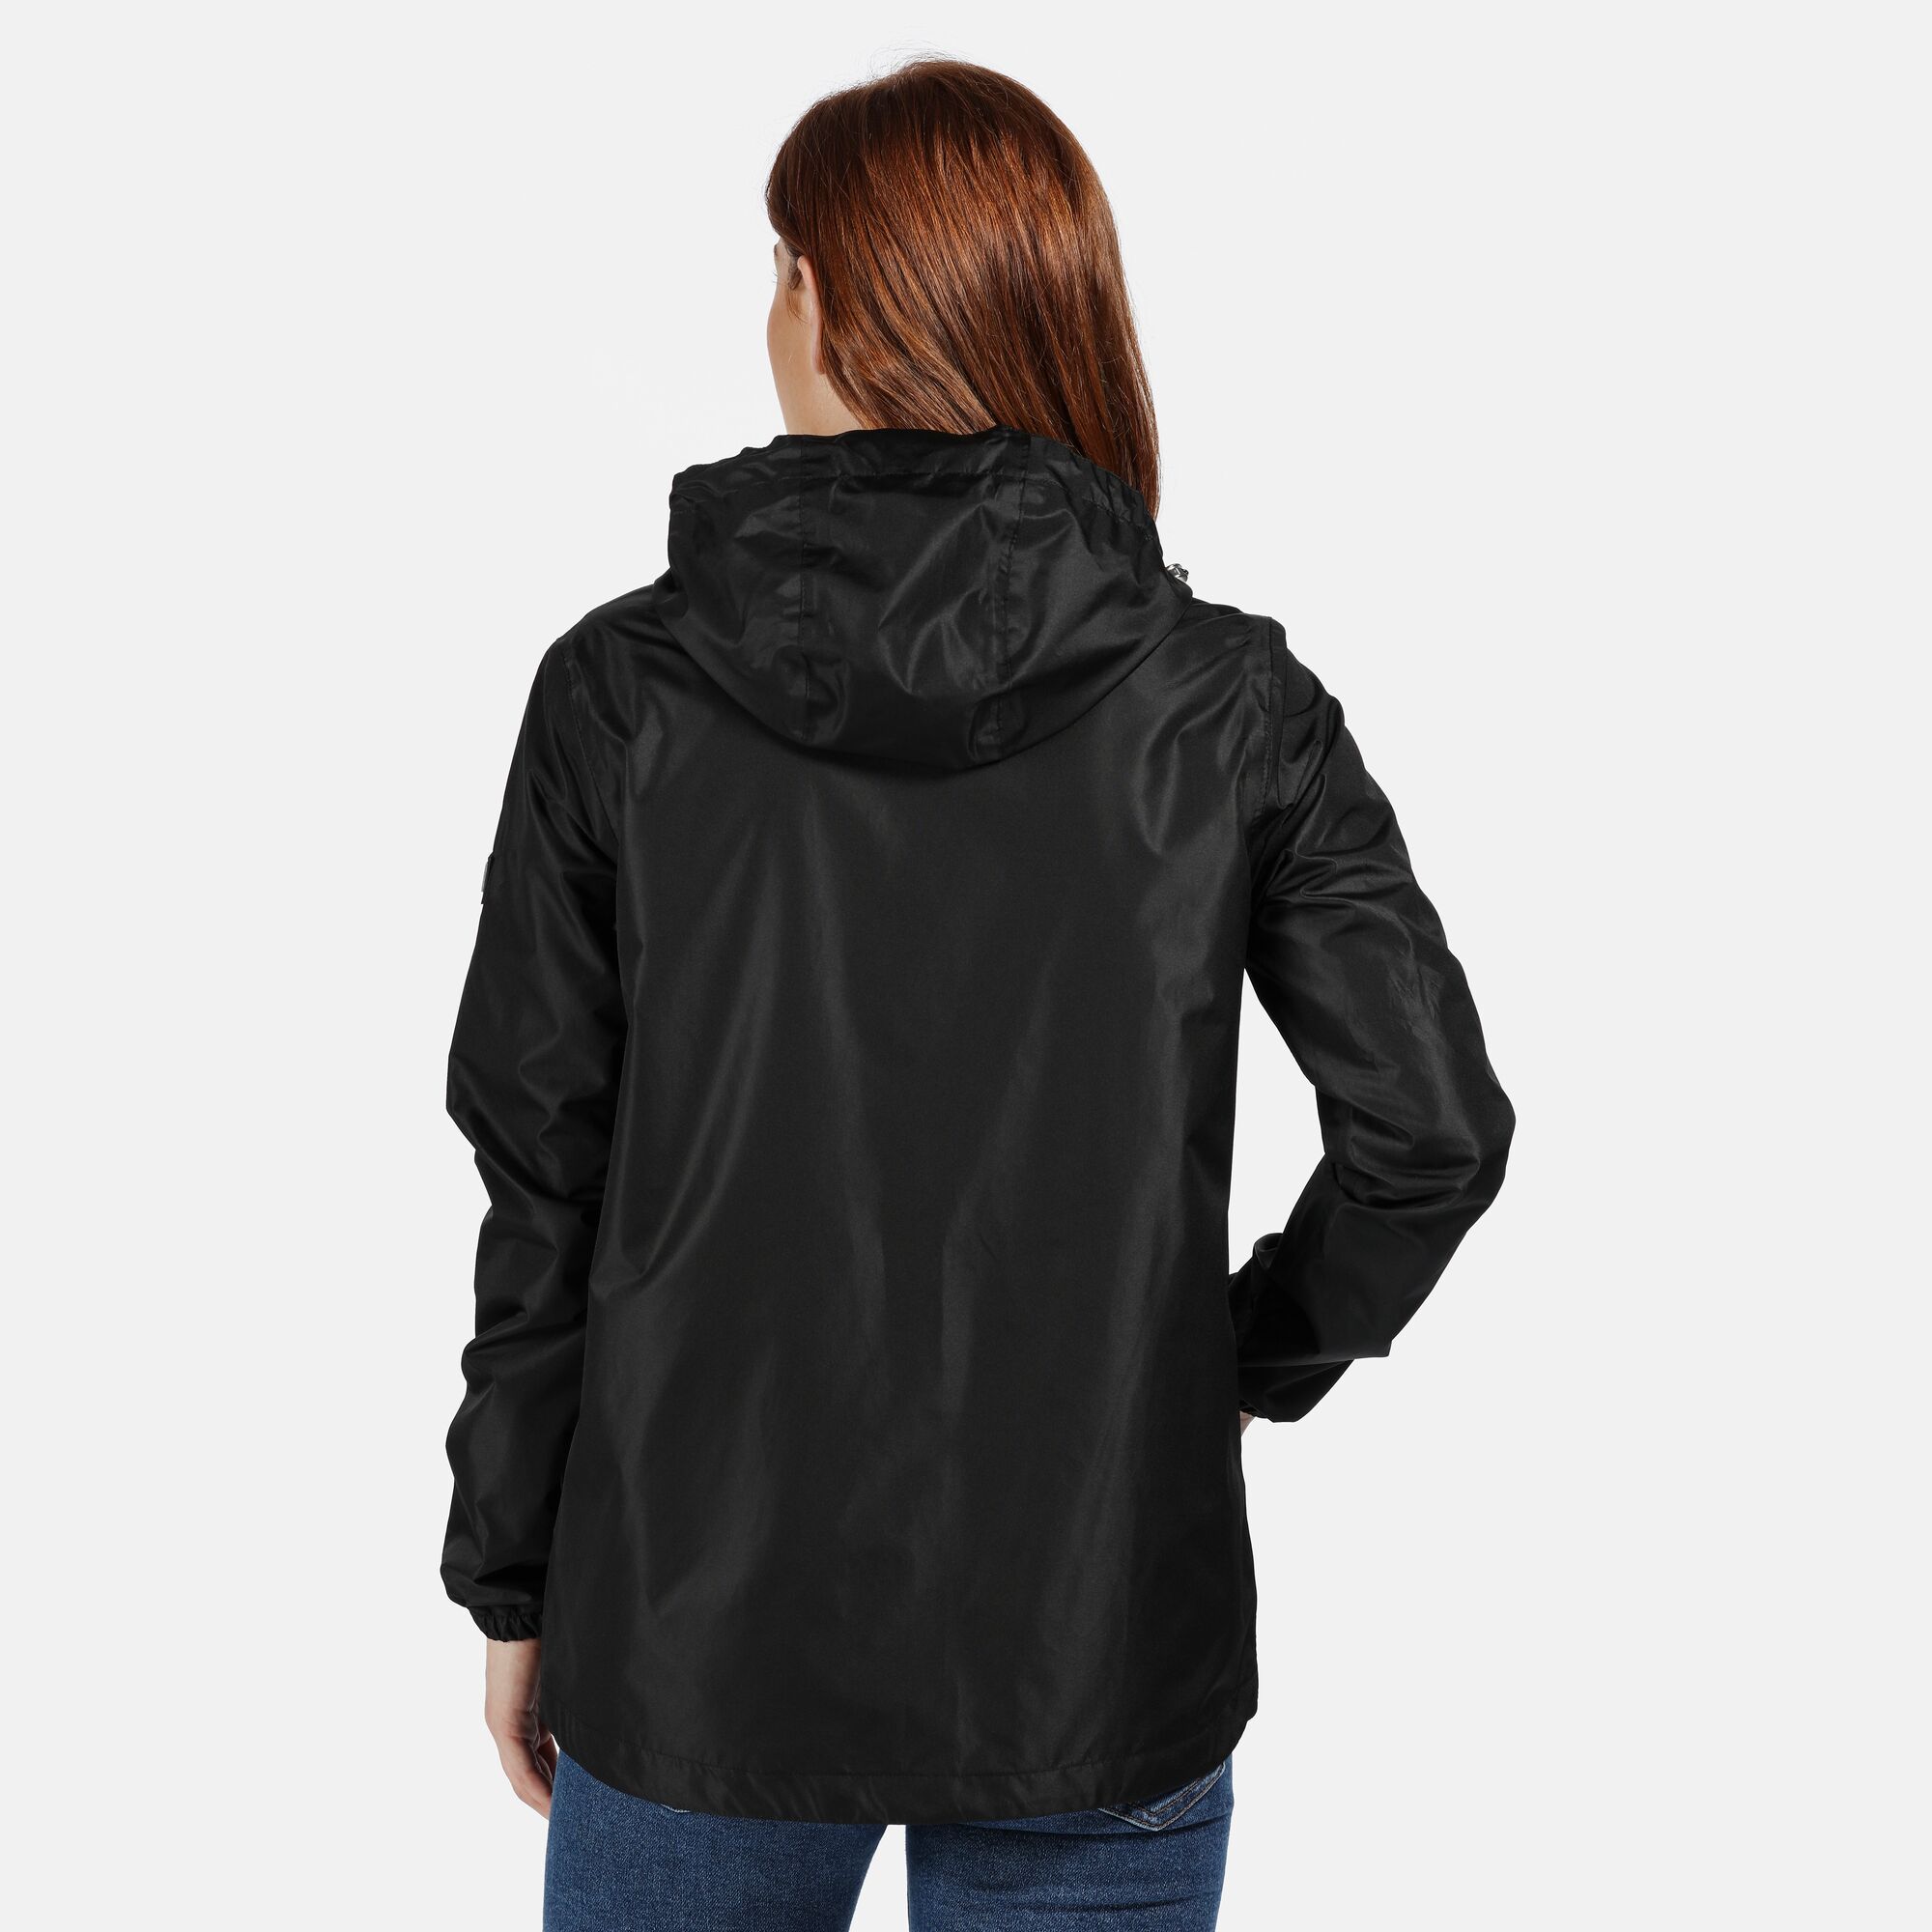 Material: 100% polyester. Durable water repellent finish. Taped seams. Polyester taffeta lining. Grown on hood with adjusters. Elasticated cuffs. 2 lower pockets with flaps and branded snap fastening. Adjustable shockcord hem.